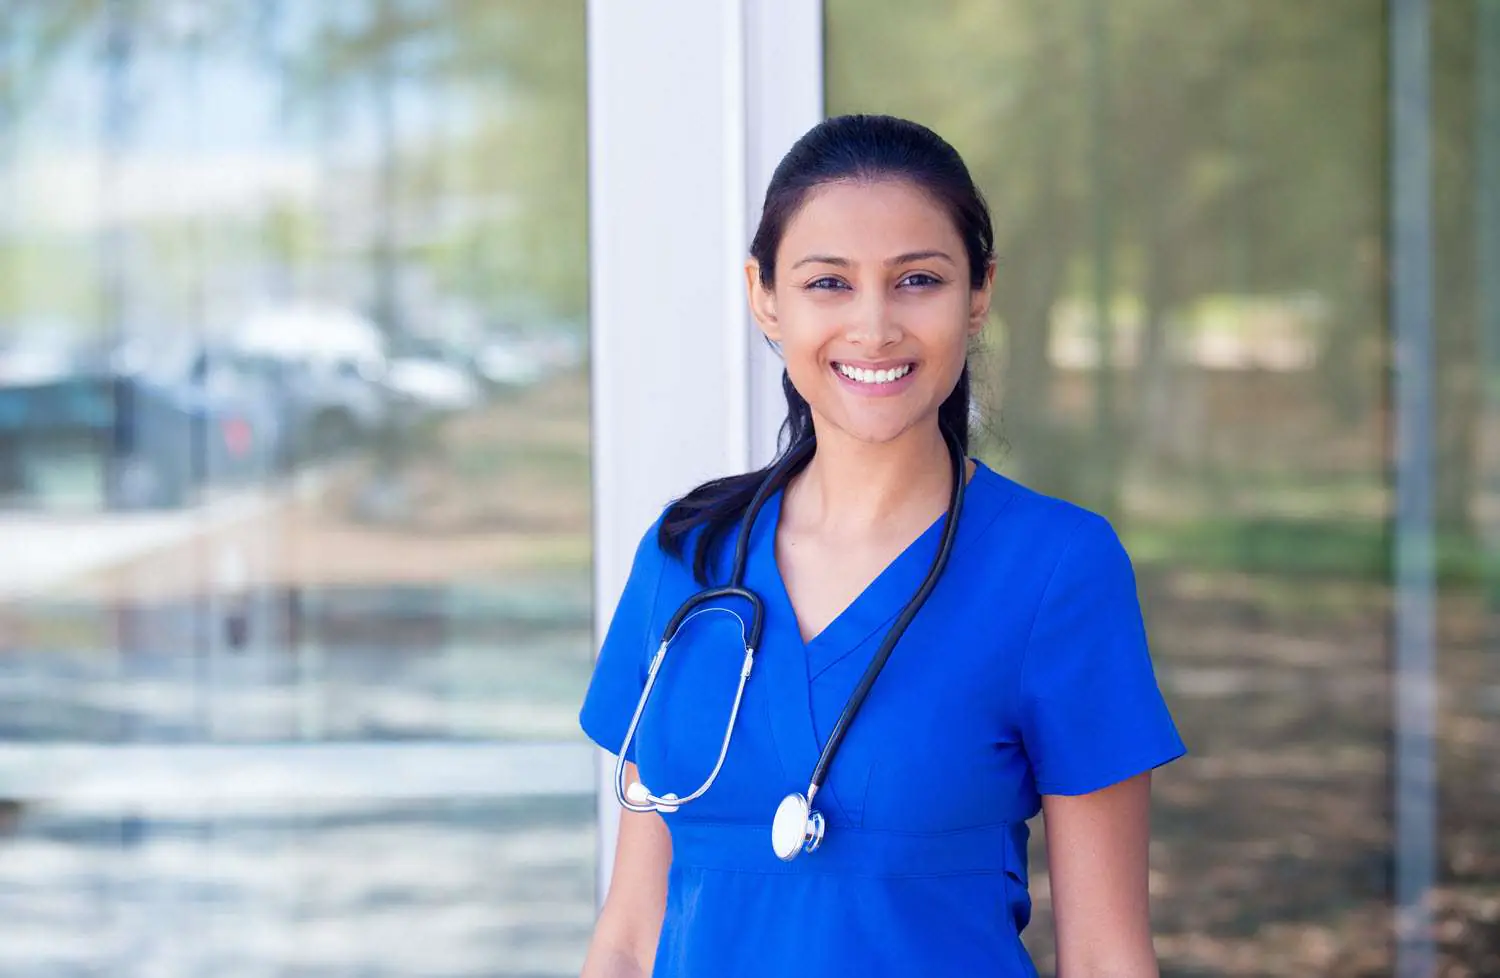 Licensed Practical Nurses (LPNs): How to Hire in 2021